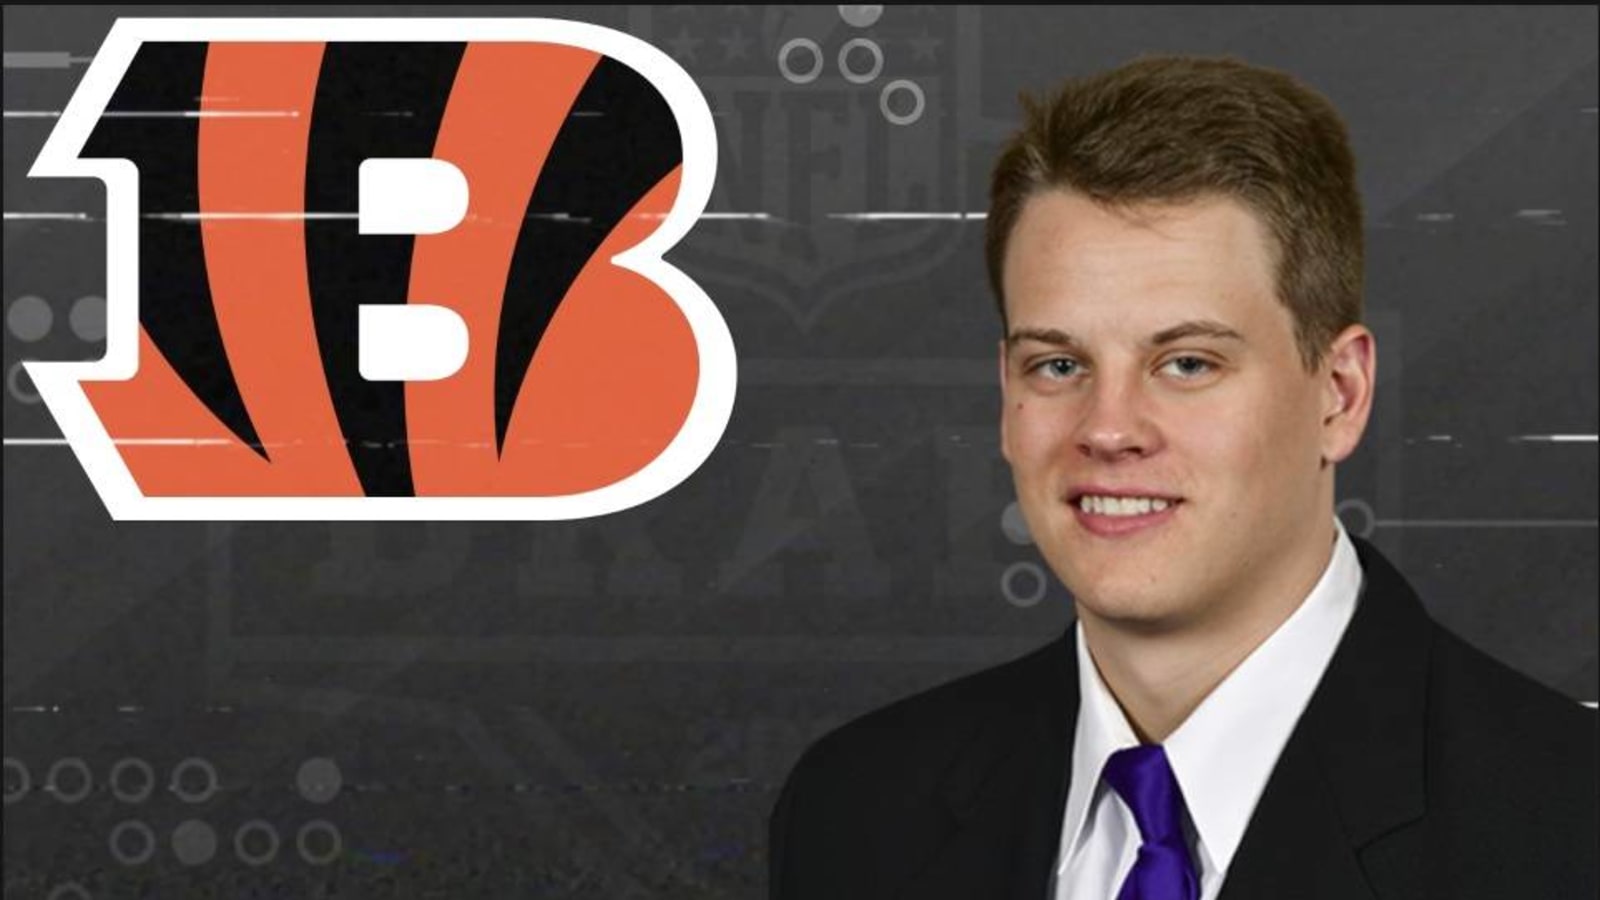 Bengals select Joe Burrow first overall in 2020 NFL Draft